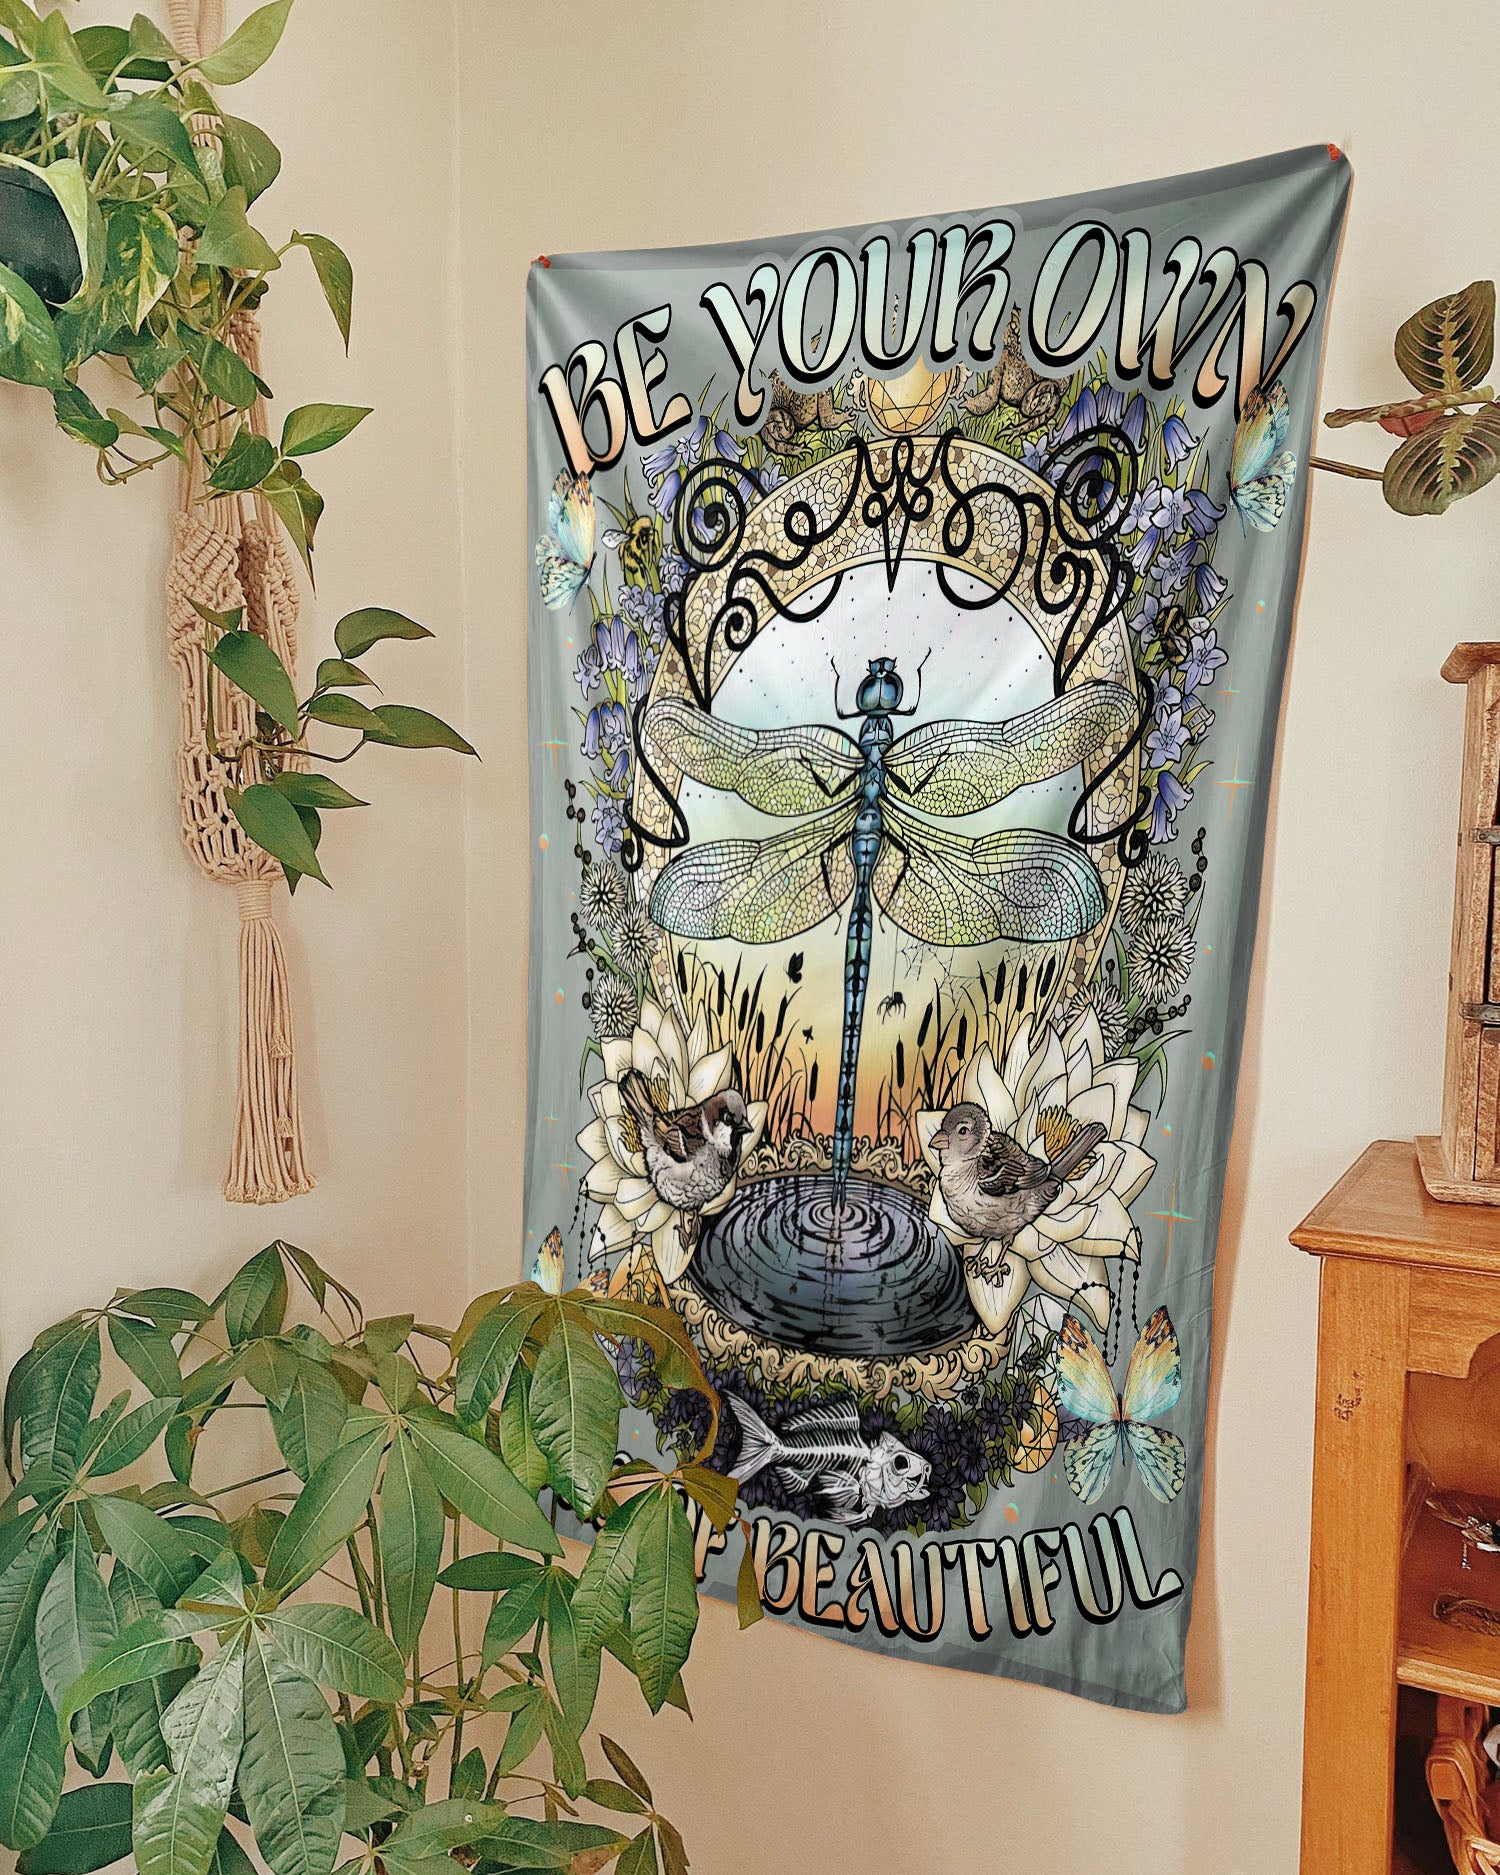 BE YOUR OWN KIND OF BEAUTIFUL DRAGONFLY TAPESTRY - TLNZ2107232